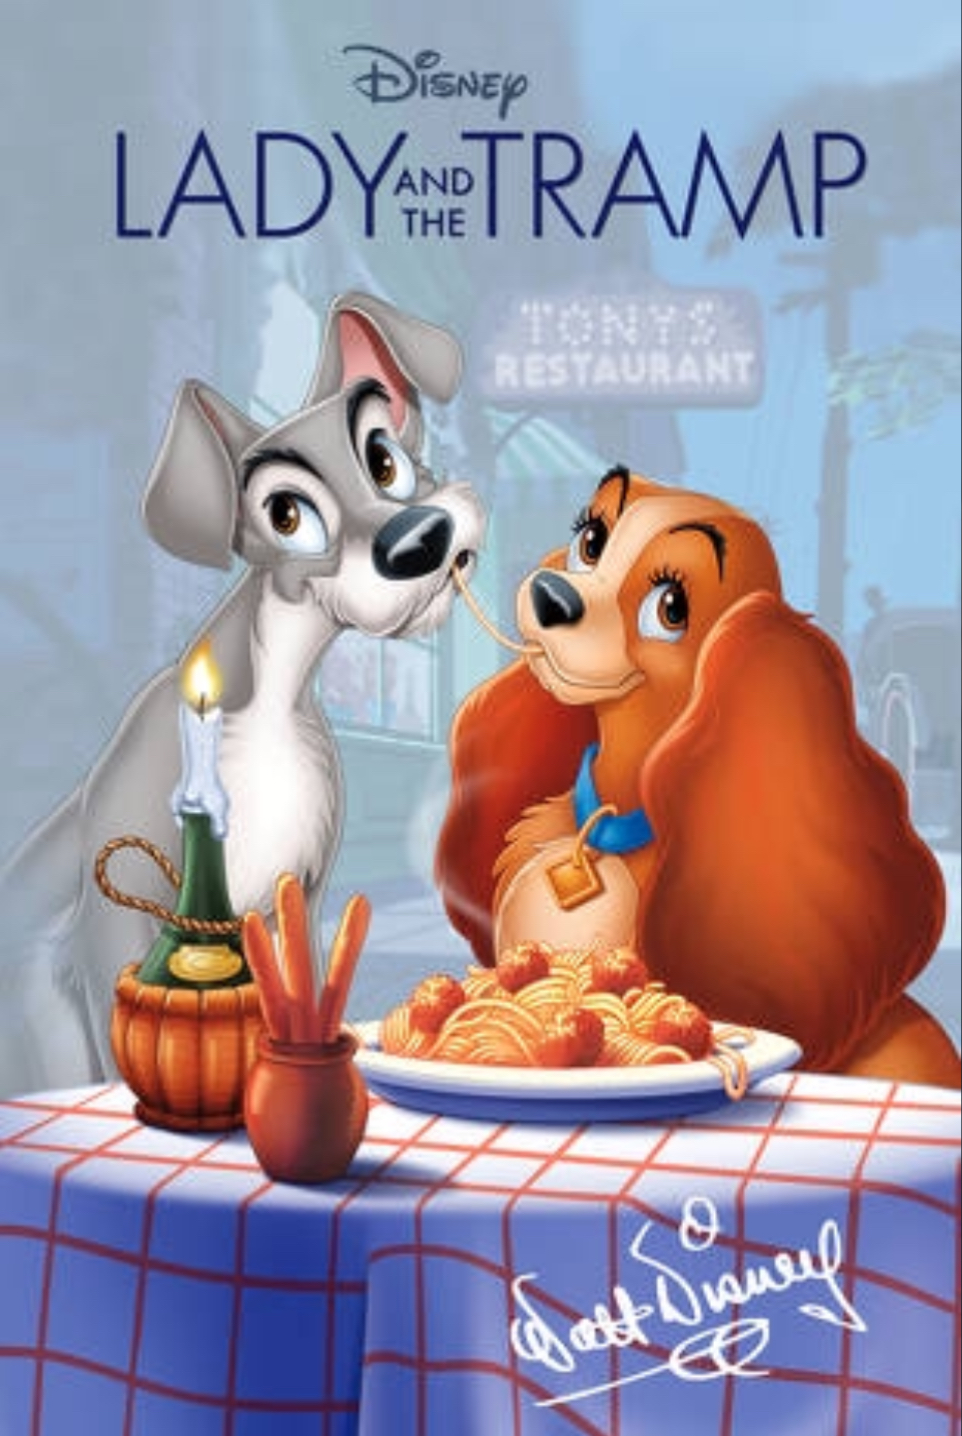 Lady and the Tramp | Transcripts Wiki | FANDOM powered by Wikia